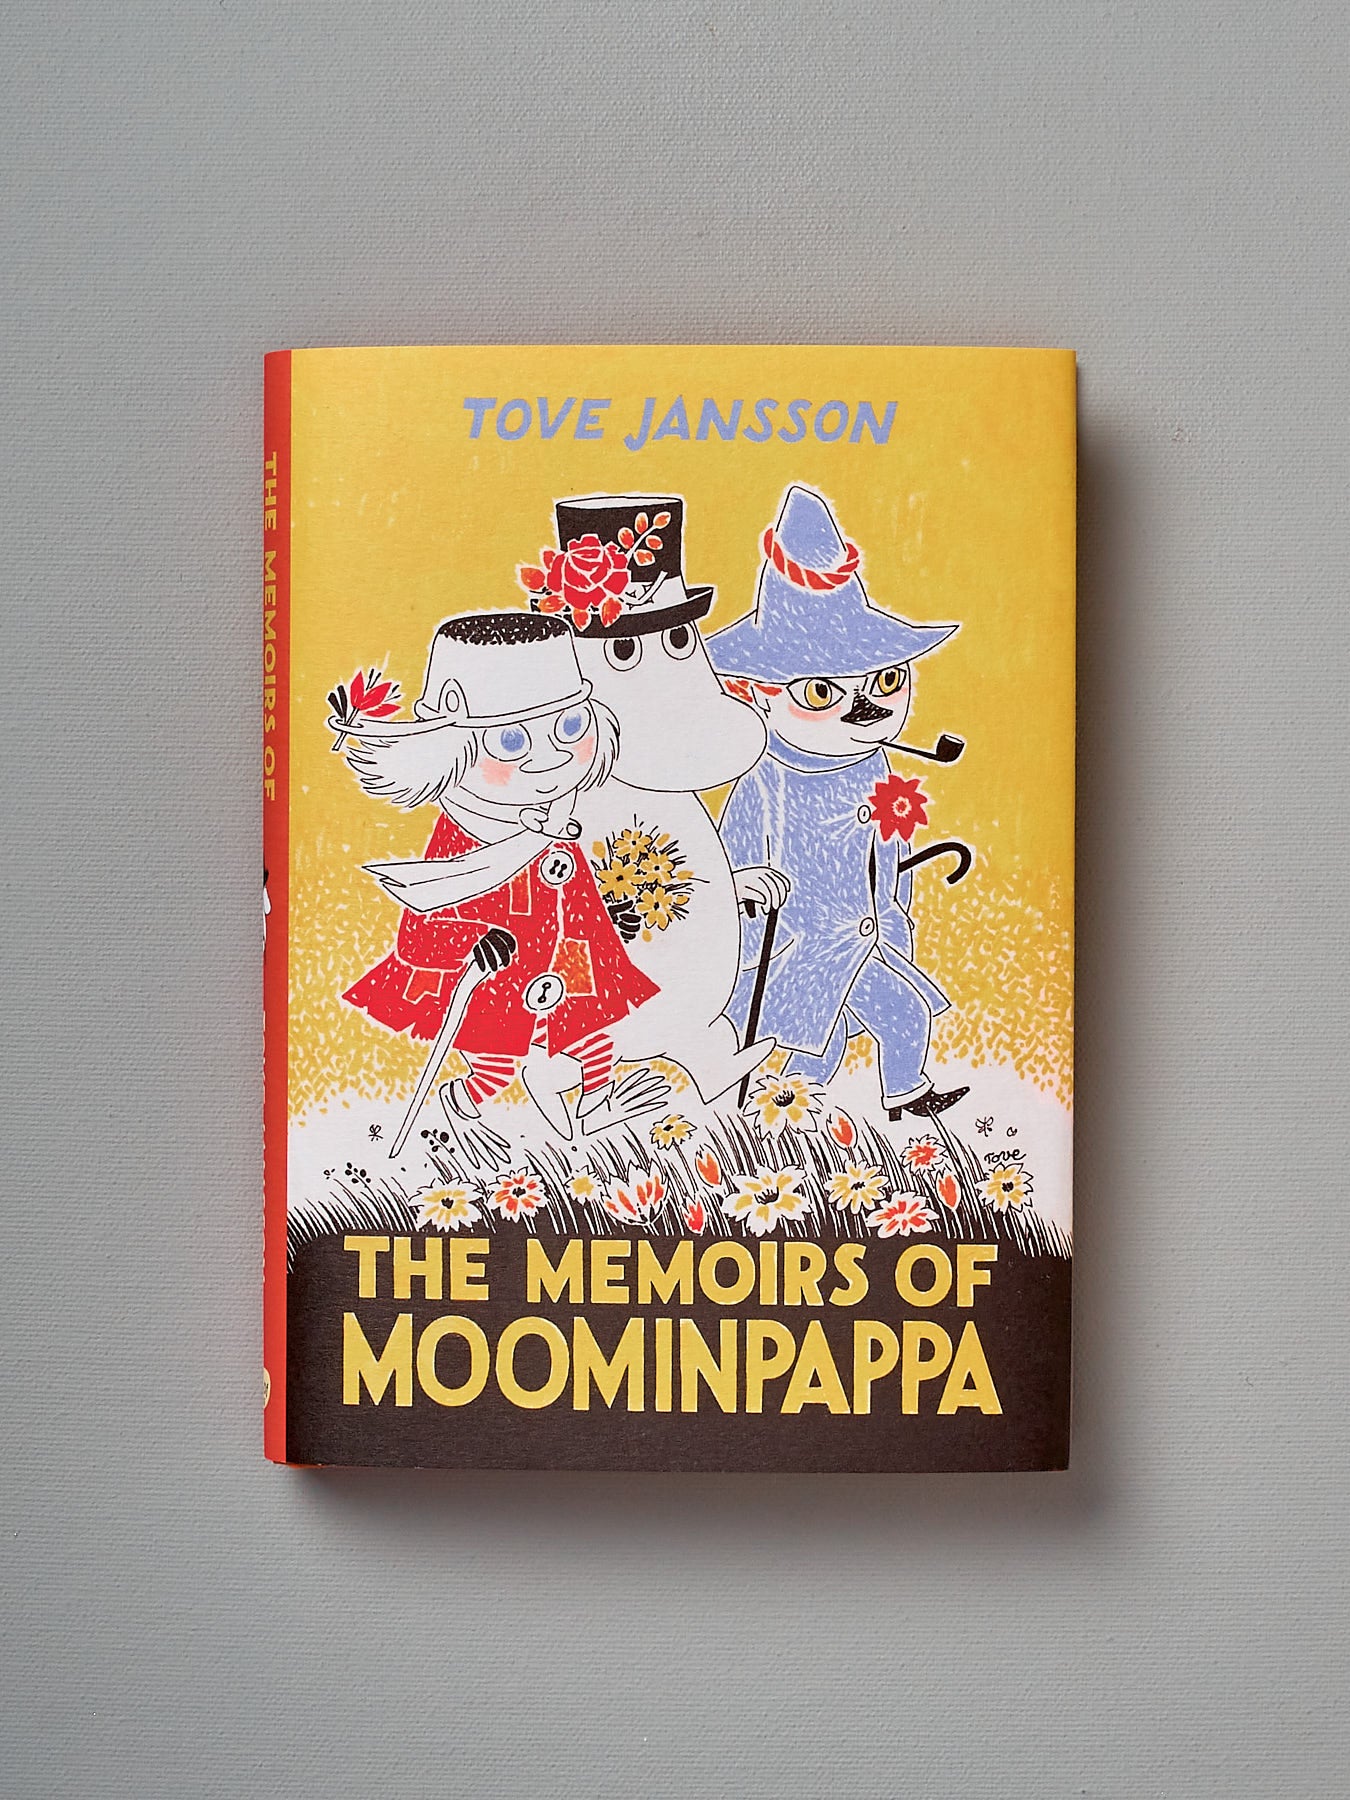 The Memoirs of Moominpappa by Tove Jansson.